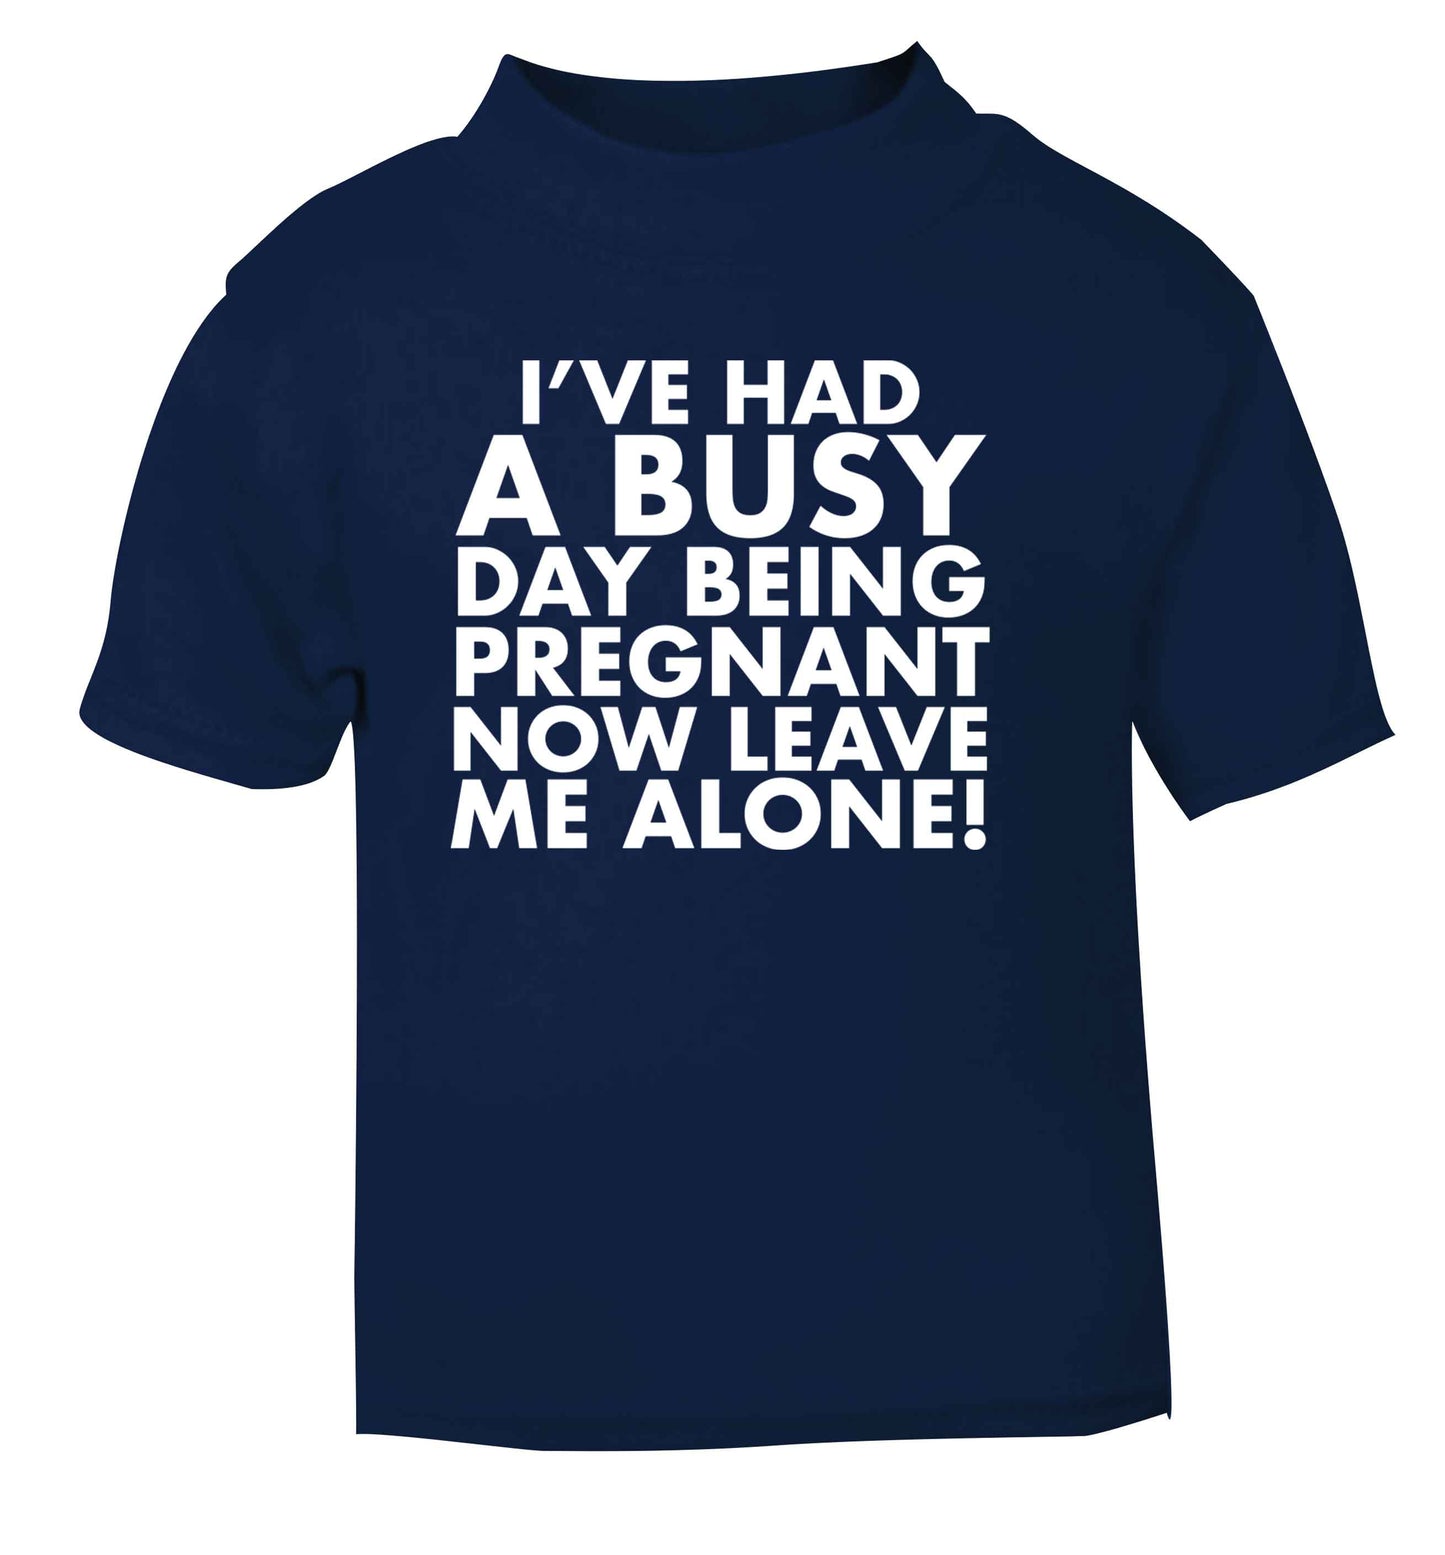 I've had a busy day being pregnant now leave me alone navy Baby Toddler Tshirt 2 Years